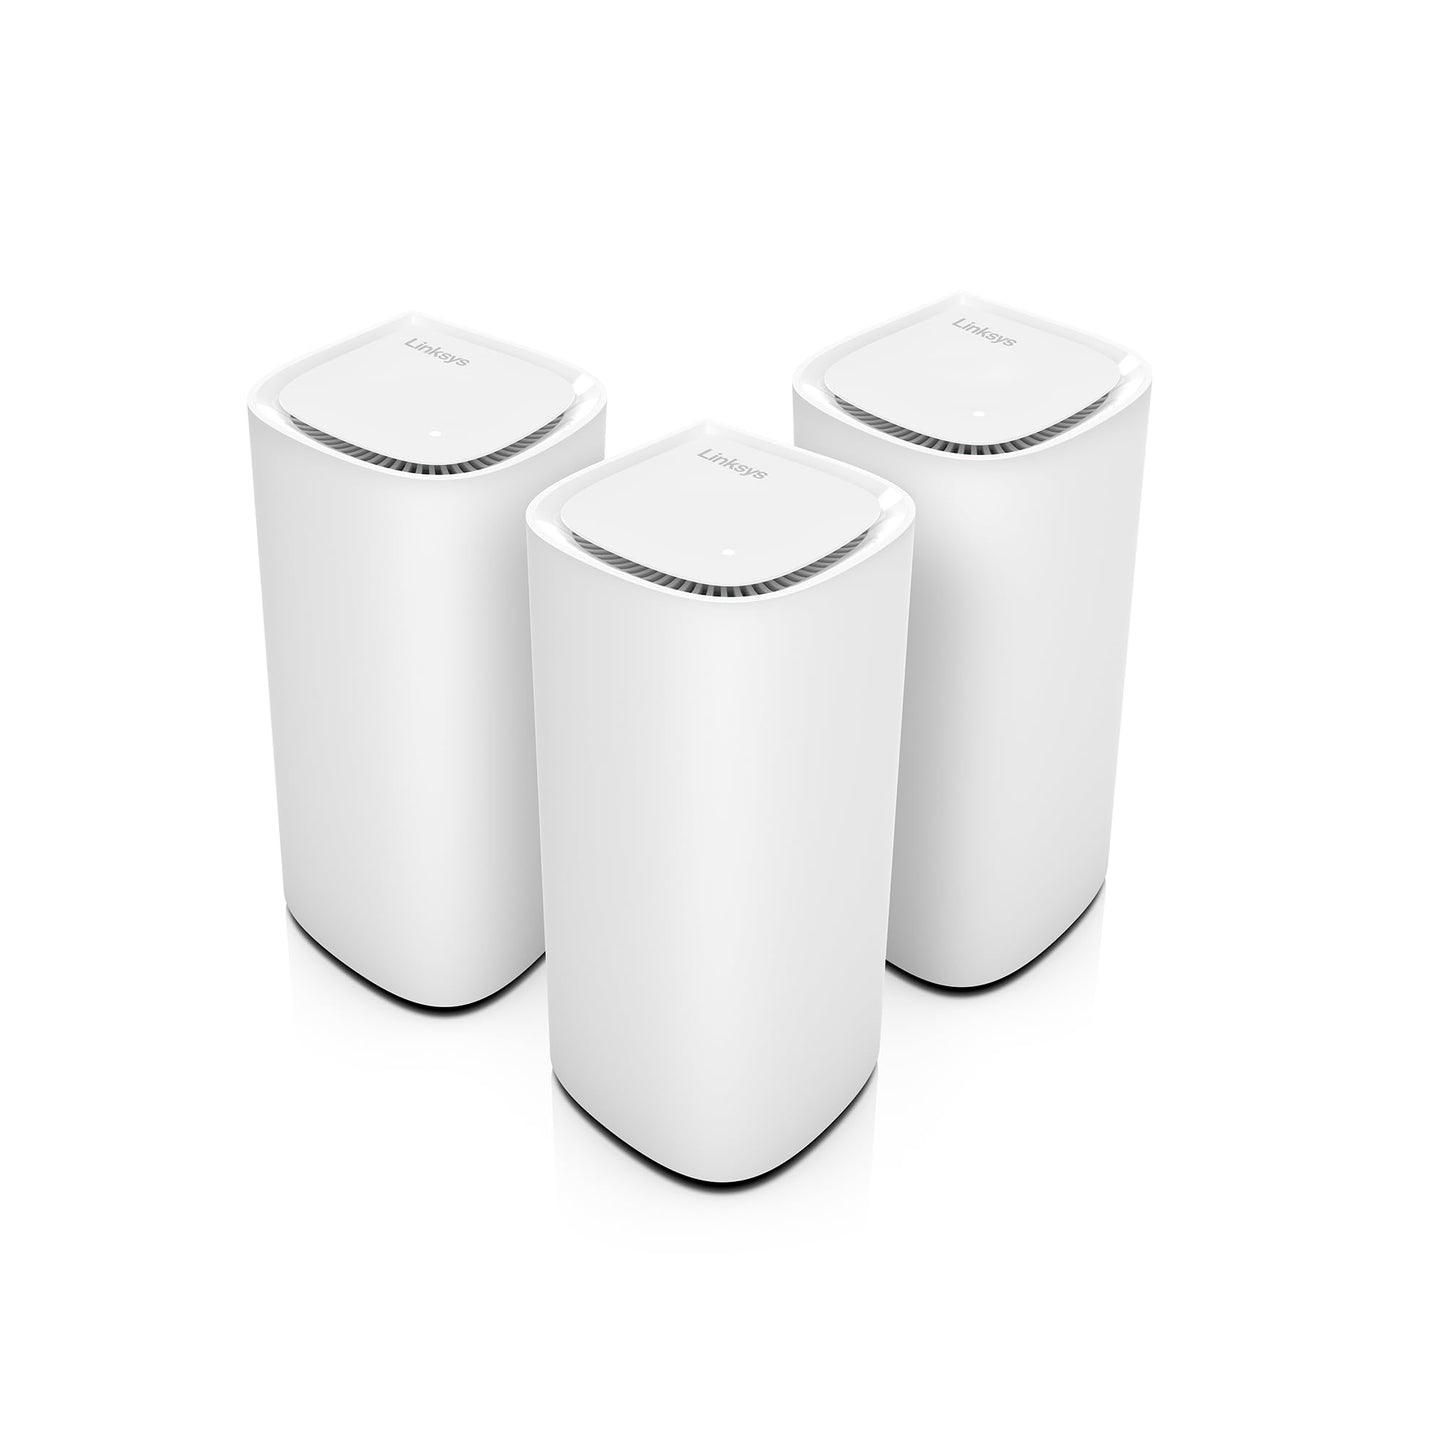 Linksys Velop Pro 7 WiFi Mesh System | Three Cognitive Tri-Band routers | 10 Gbps Speeds | 9,000 sq. ft. Coverage| Connect 200+ Devices | 3 Pack MBE7003 | 2023 Release